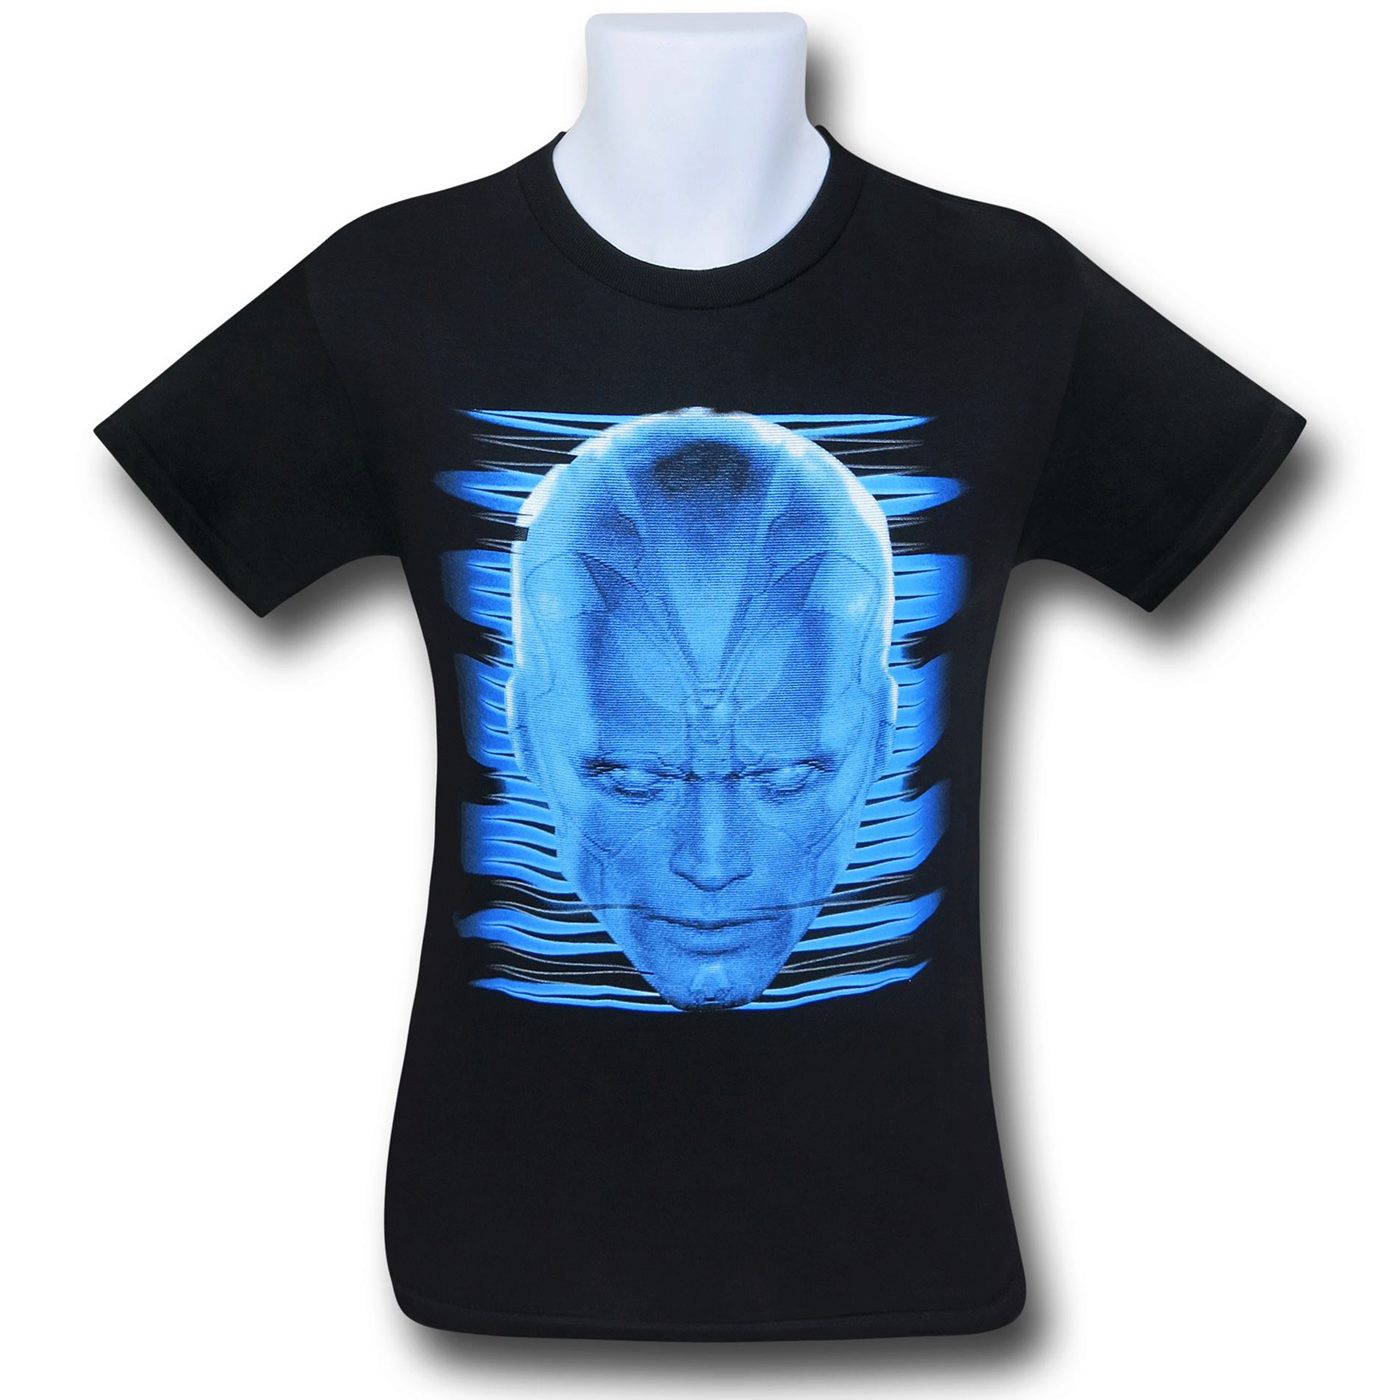 Avengers Age of Ultron Vision Blur Glow T-Shirt